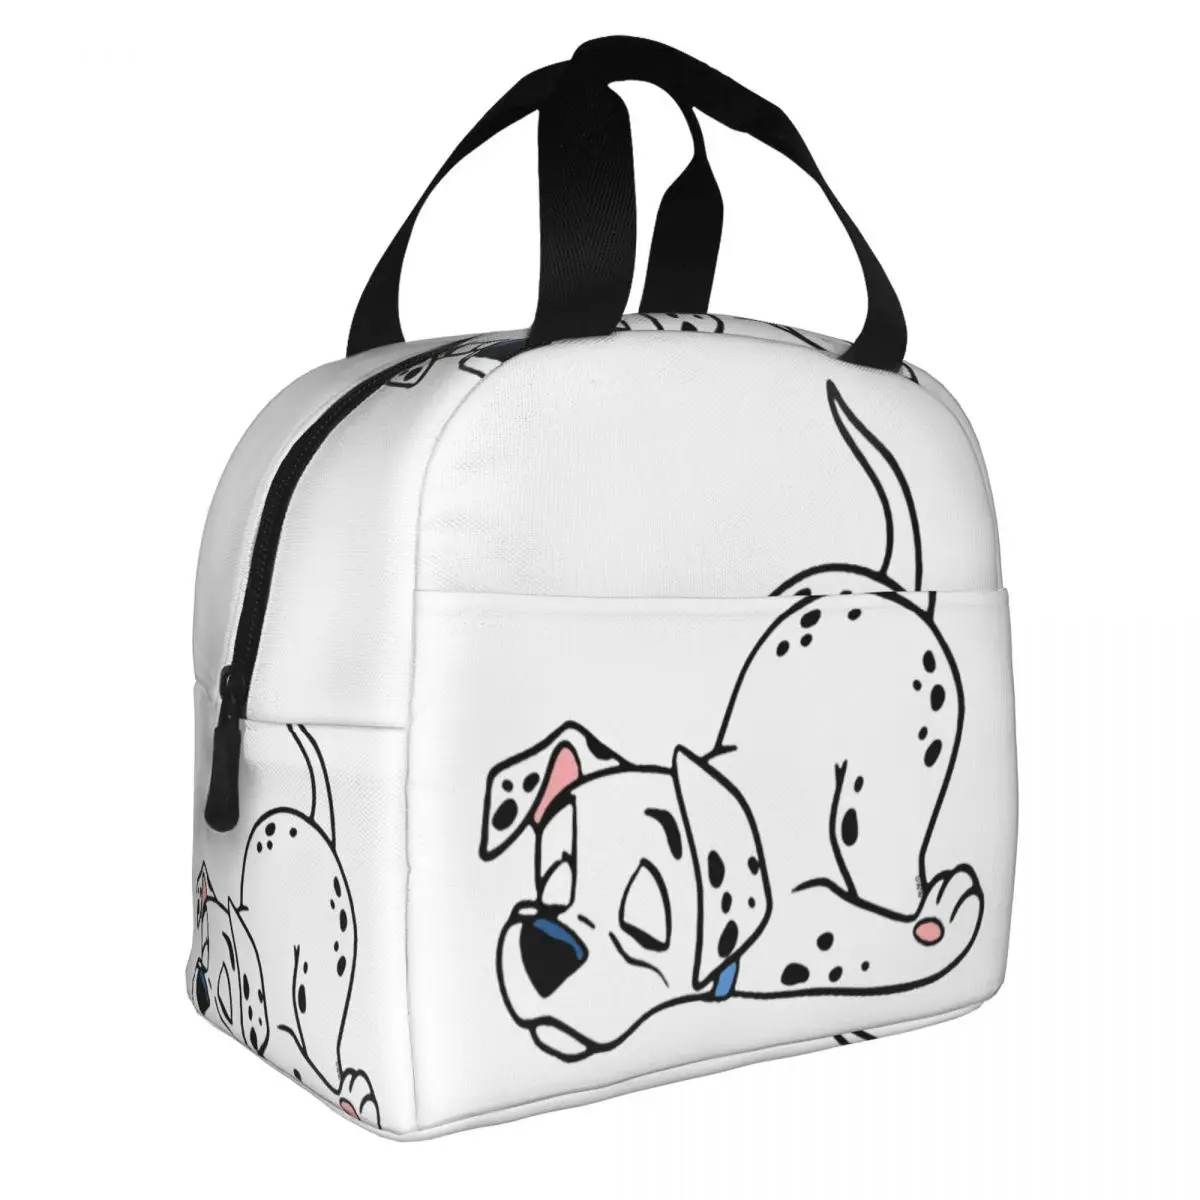 

Dalmatian Qui Dort Lunch Bag Men Women Cooler Thermal Insulated Lunch Boxes for Children School lunchbag